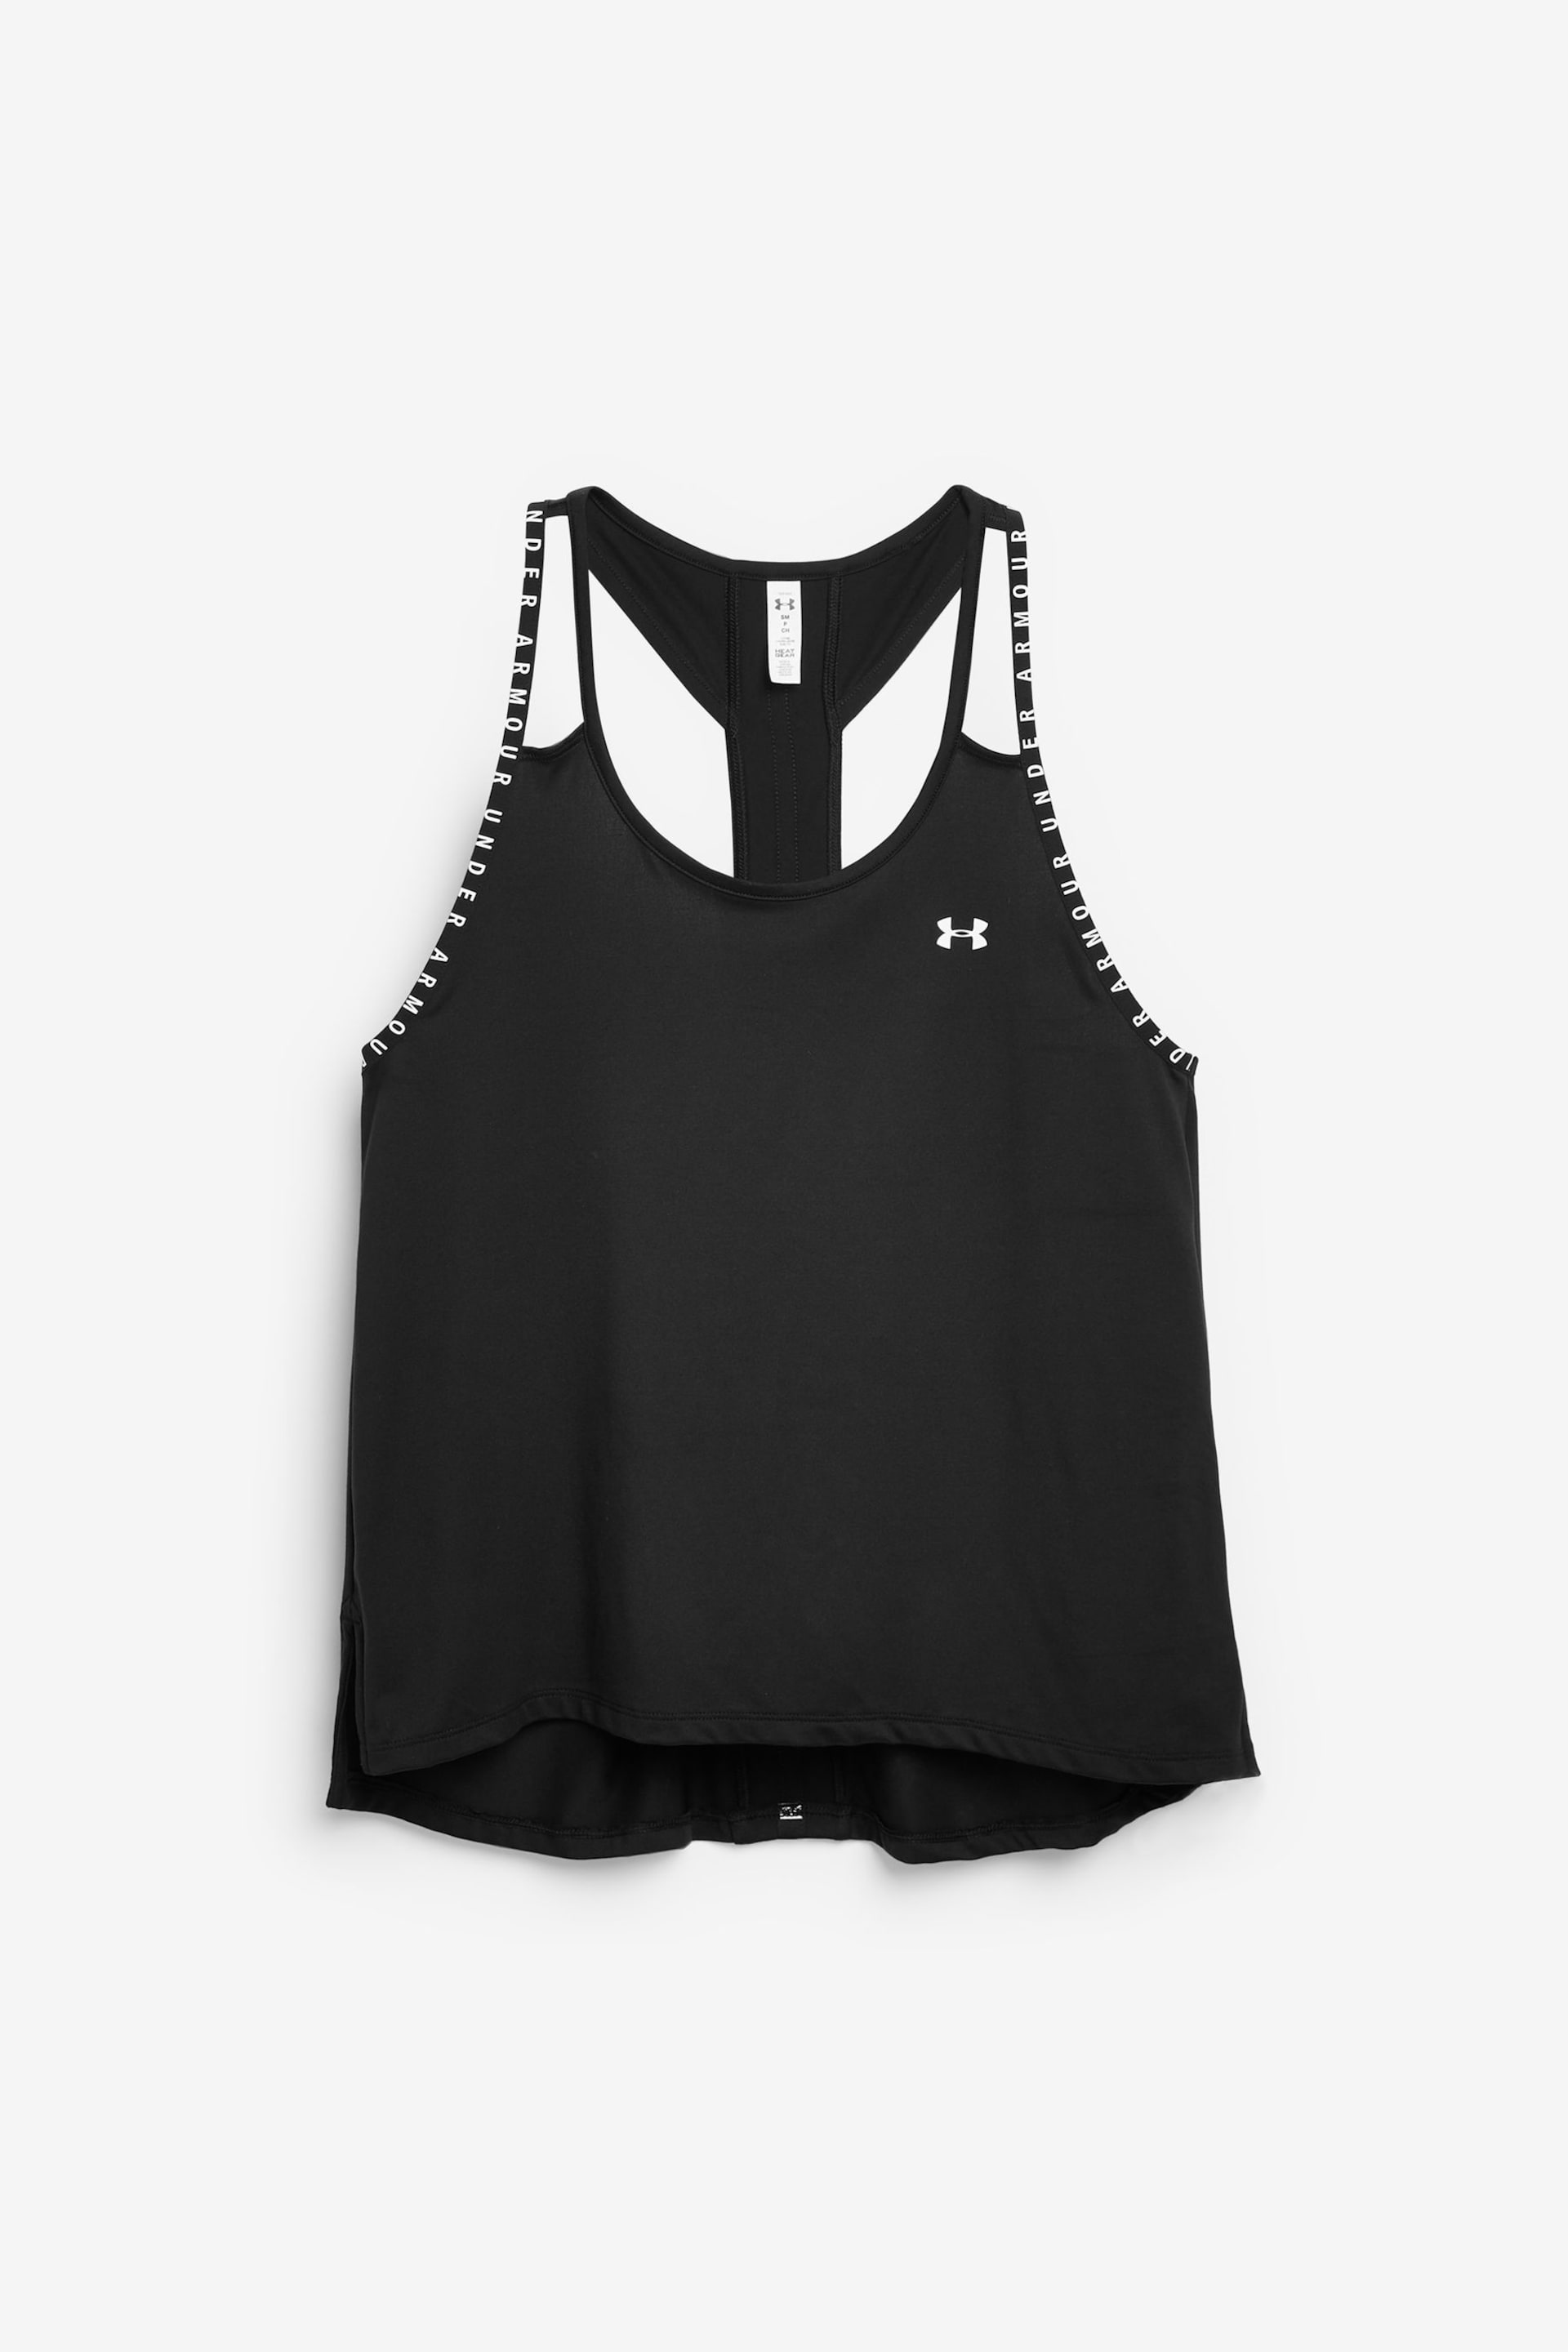 Under Armour Black Knockout Tank - Image 5 of 5